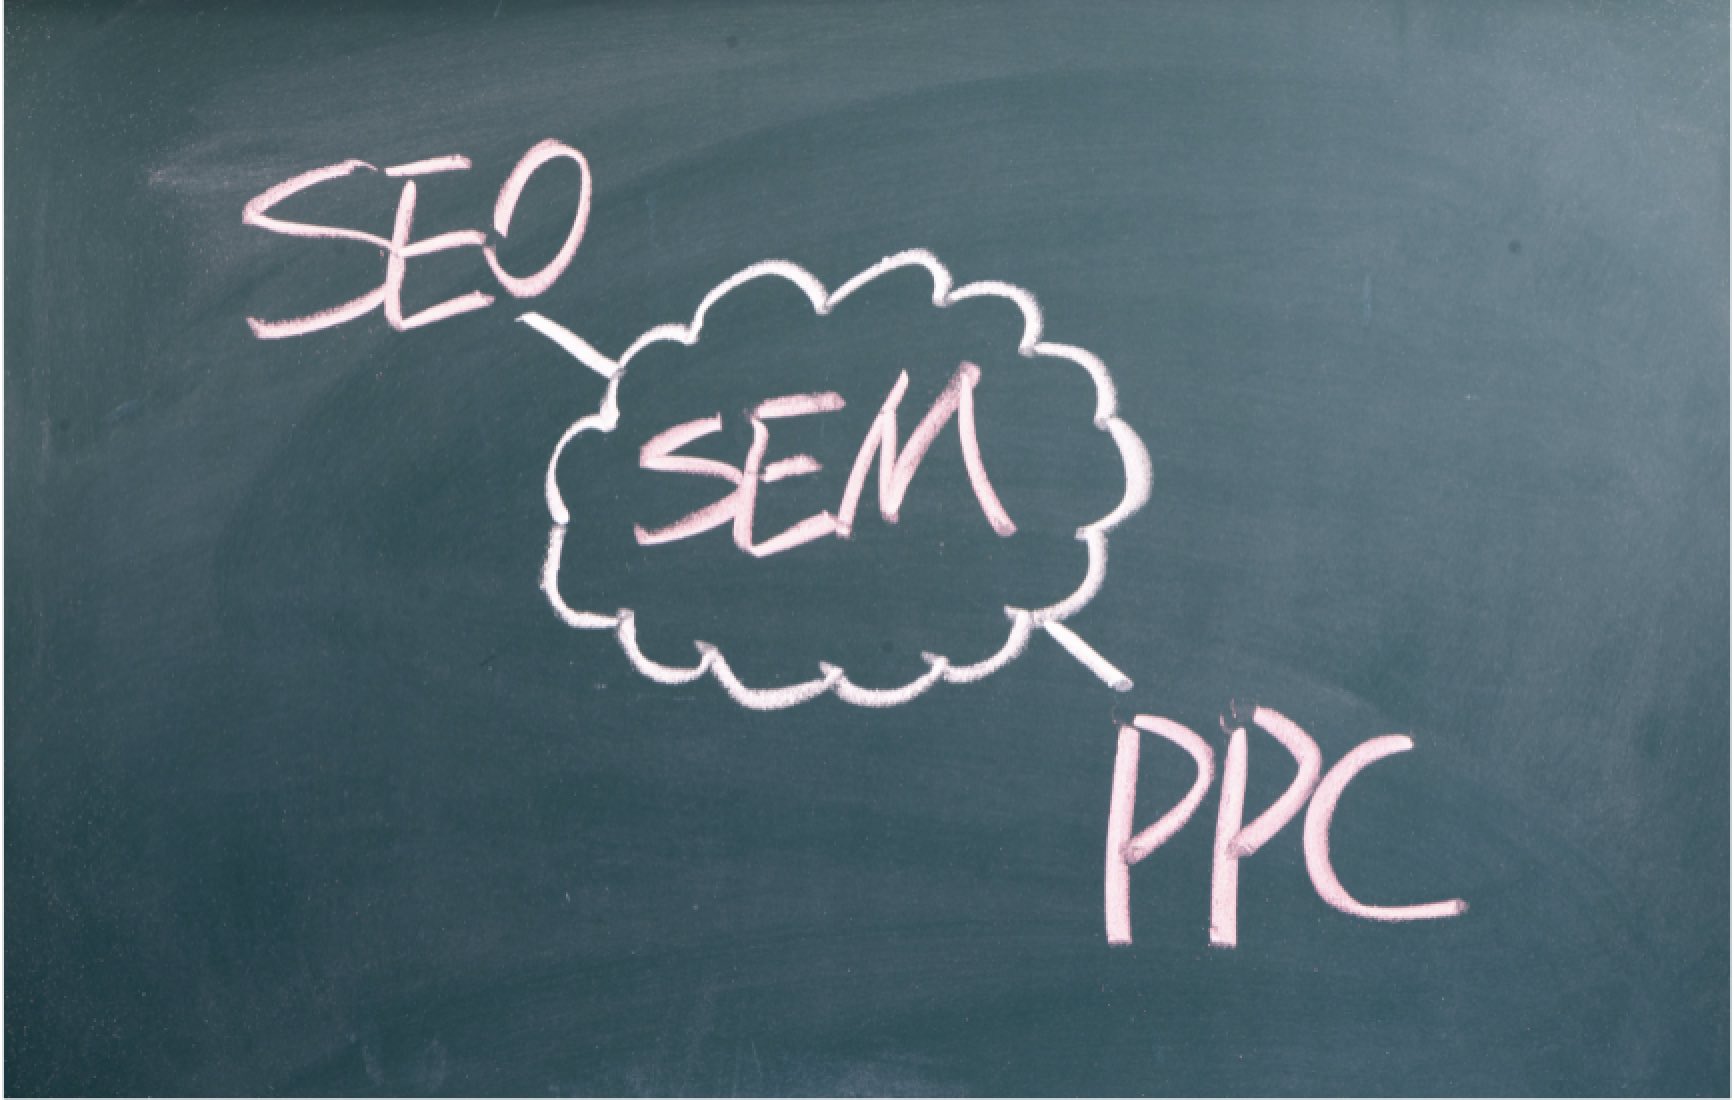 SEO & PPC working together